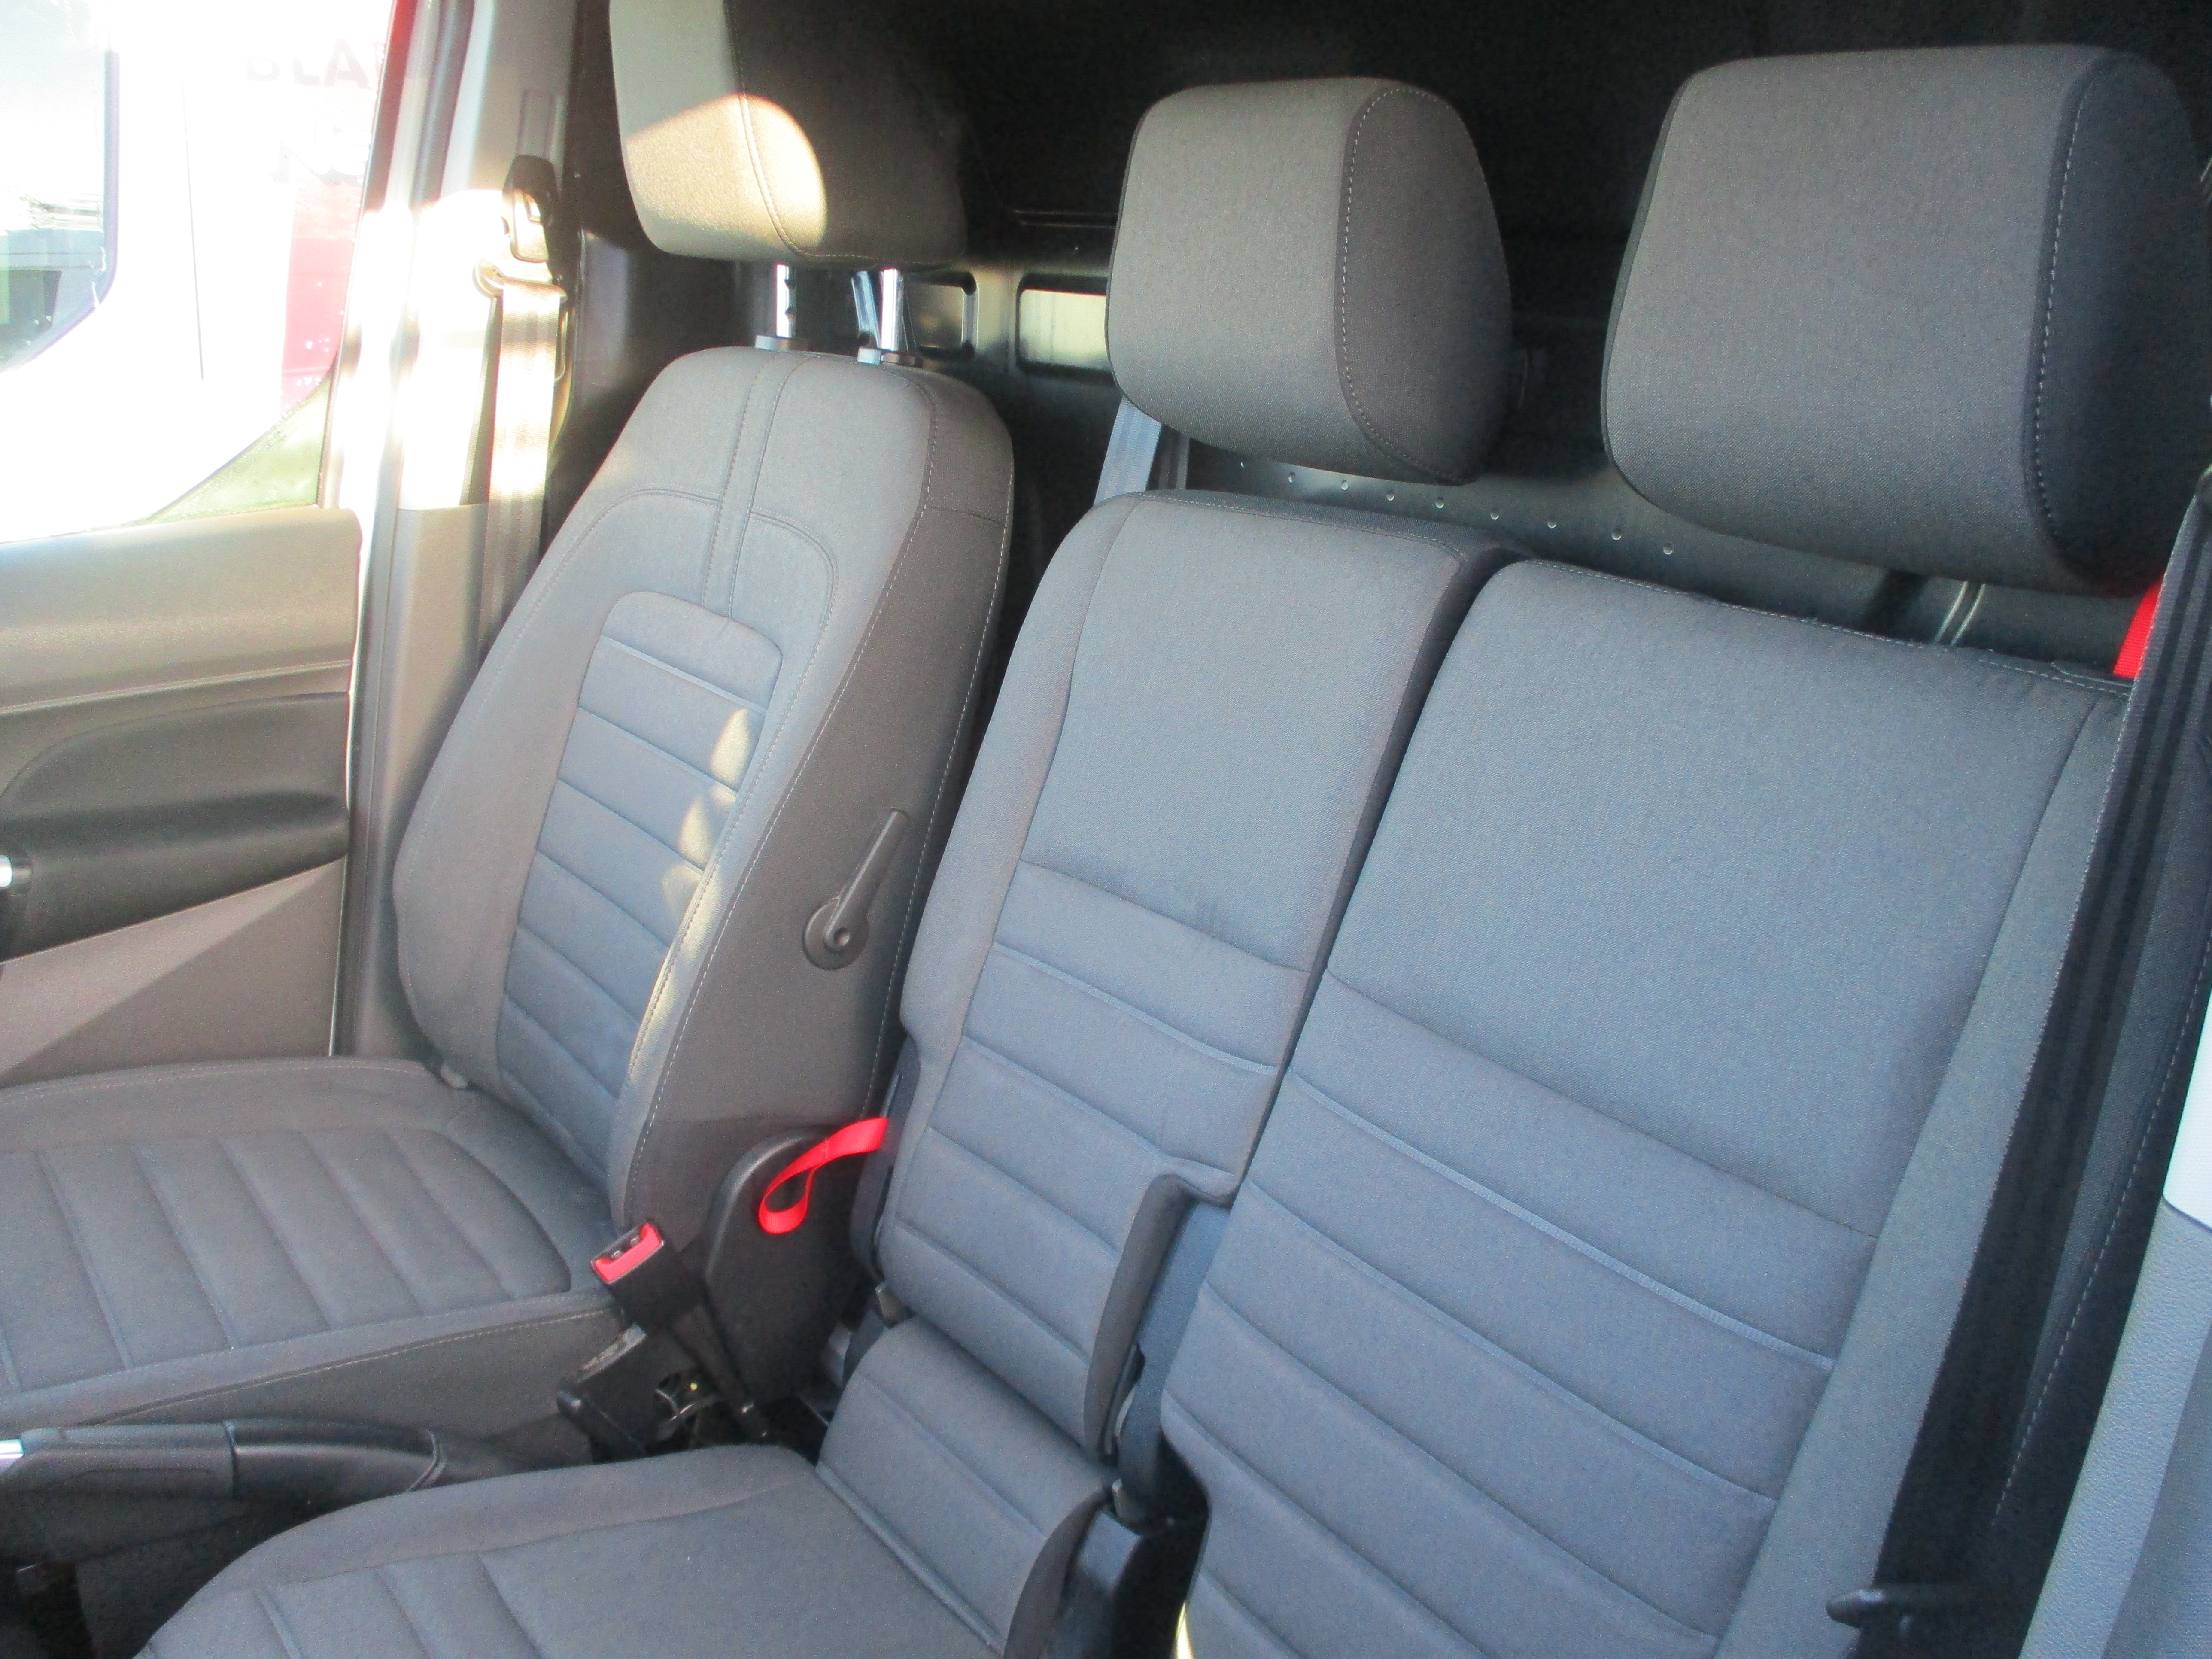 Ford Connect 200 L1 1.5 EcoBlue 120PS Limited Panel Van ( EURO 6 ) 3 FRONT SEATS £200 OFF RRP !!